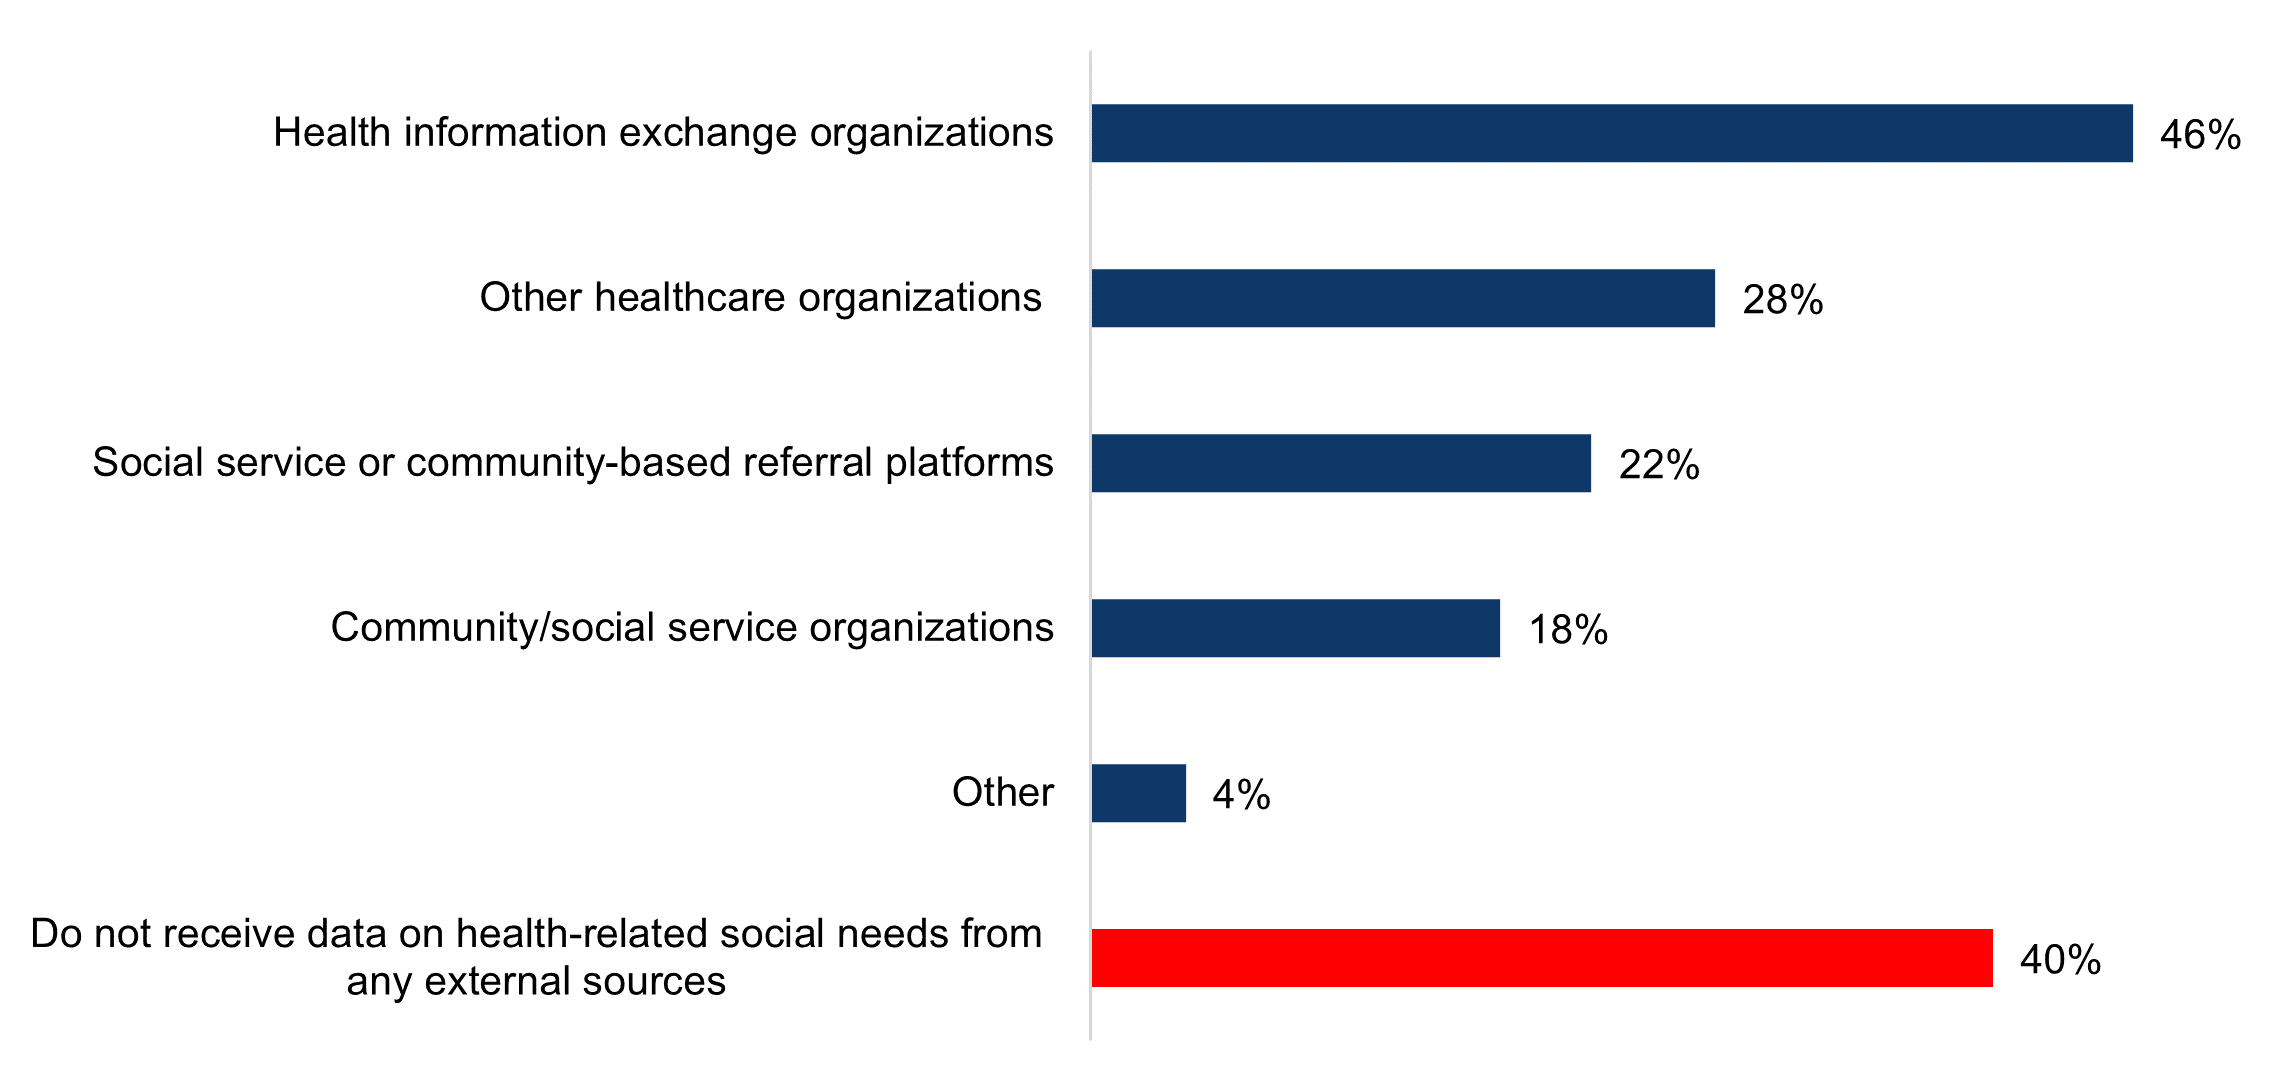 This figure contains a horizontal column chart illustrating the methods and sources from which hospitals electronically received data on patients’ health-related social needs. In 2022, 46 percent of hospitals indicated they received social needs data from health information exchange organizations (HIEs), 28 percent reported receiving social needs data from other healthcare organizations, 22 percent indicated they received social needs data through social service or community-based referral platforms, 18 percent indicated they received social needs data from community/social service organizations, and 4 percent received social needs data from other sources. About 40 percent of hospitals reported they did not receive social needs data from any external sources.  